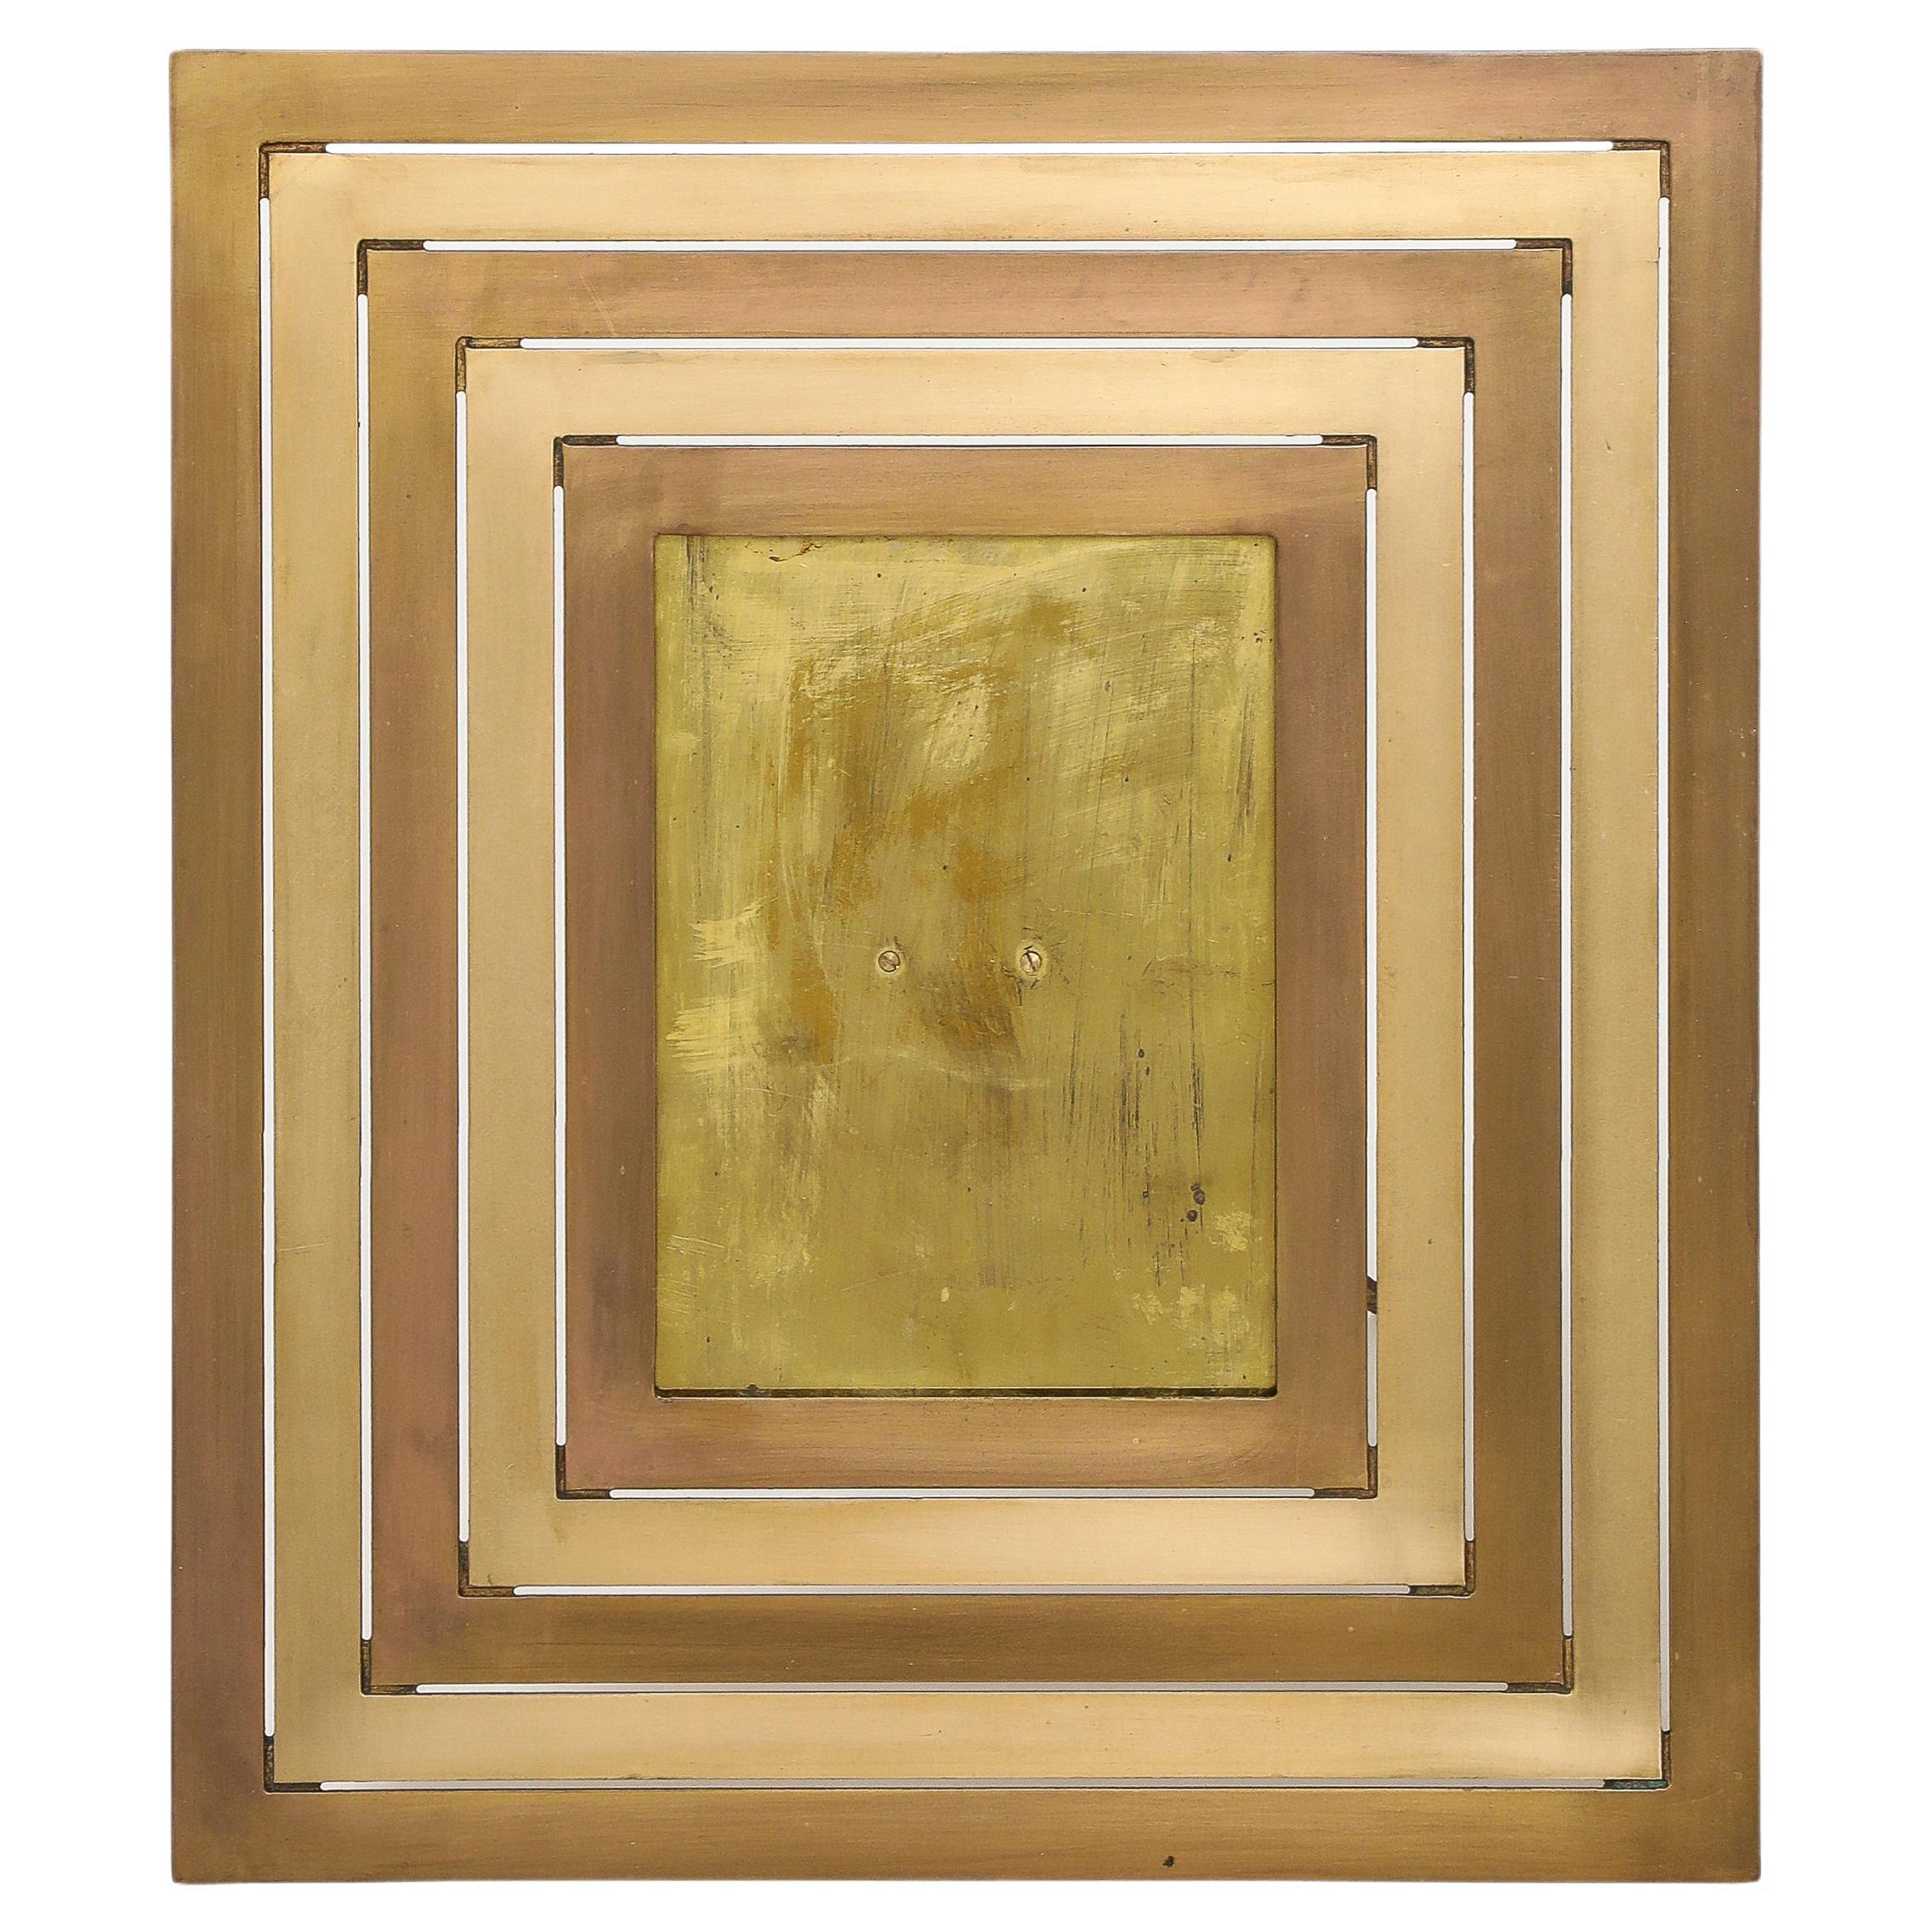 Gabriella Crespi Large Brass Rectangular Picture Frame, Signed For Sale